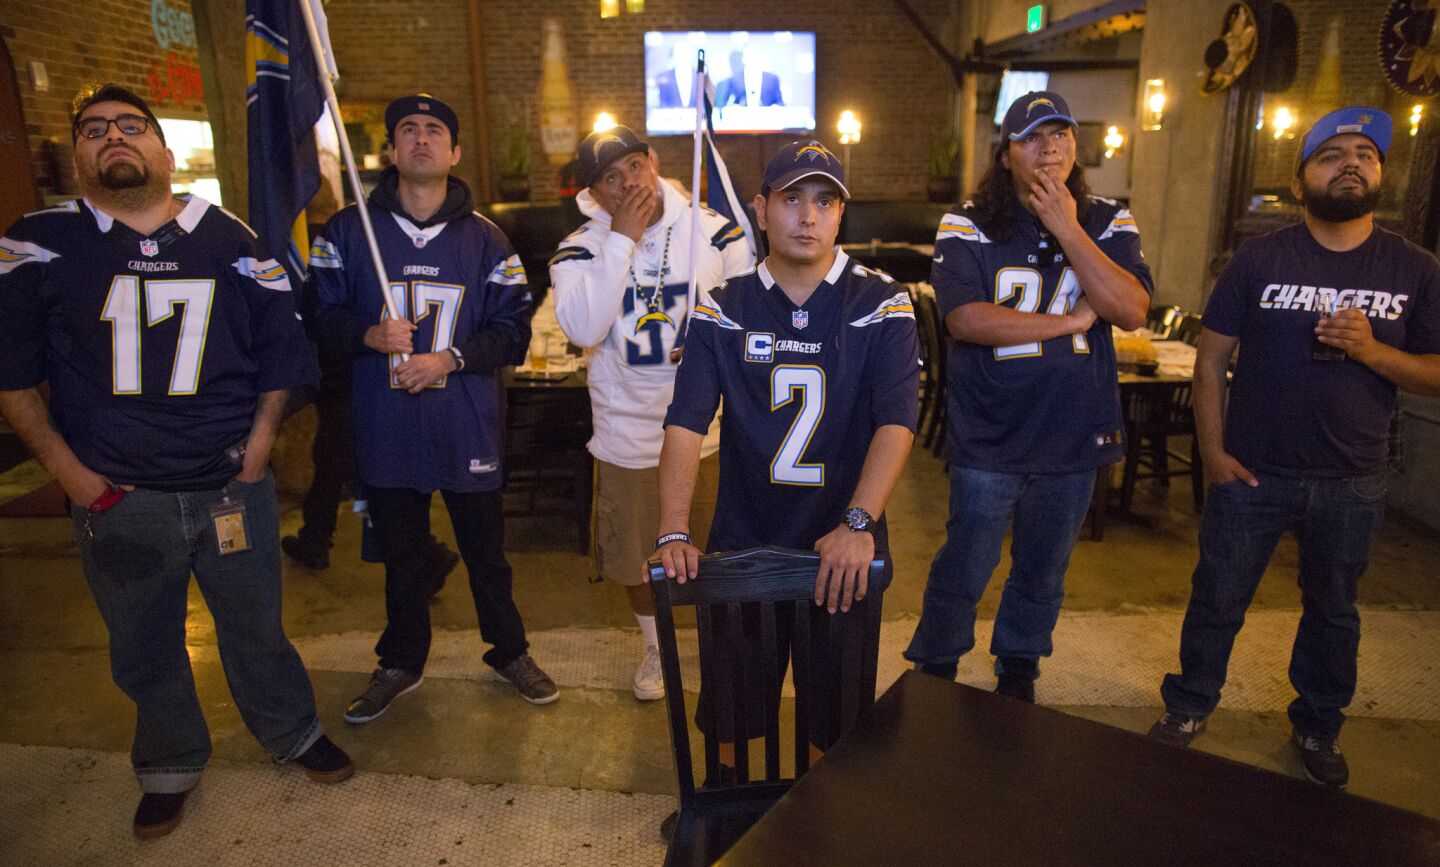 Los Angeles fans of the San Diego Chargers -- from left, Jorge Ponce, Angel Moreno, Erik Palacios, Micah Farias, Daniel Chavez and Arturo Hernandez -- react to news from the NFL owners meeting during a meet-up at El Compadre restaurant in L.A. on Jan. 12.